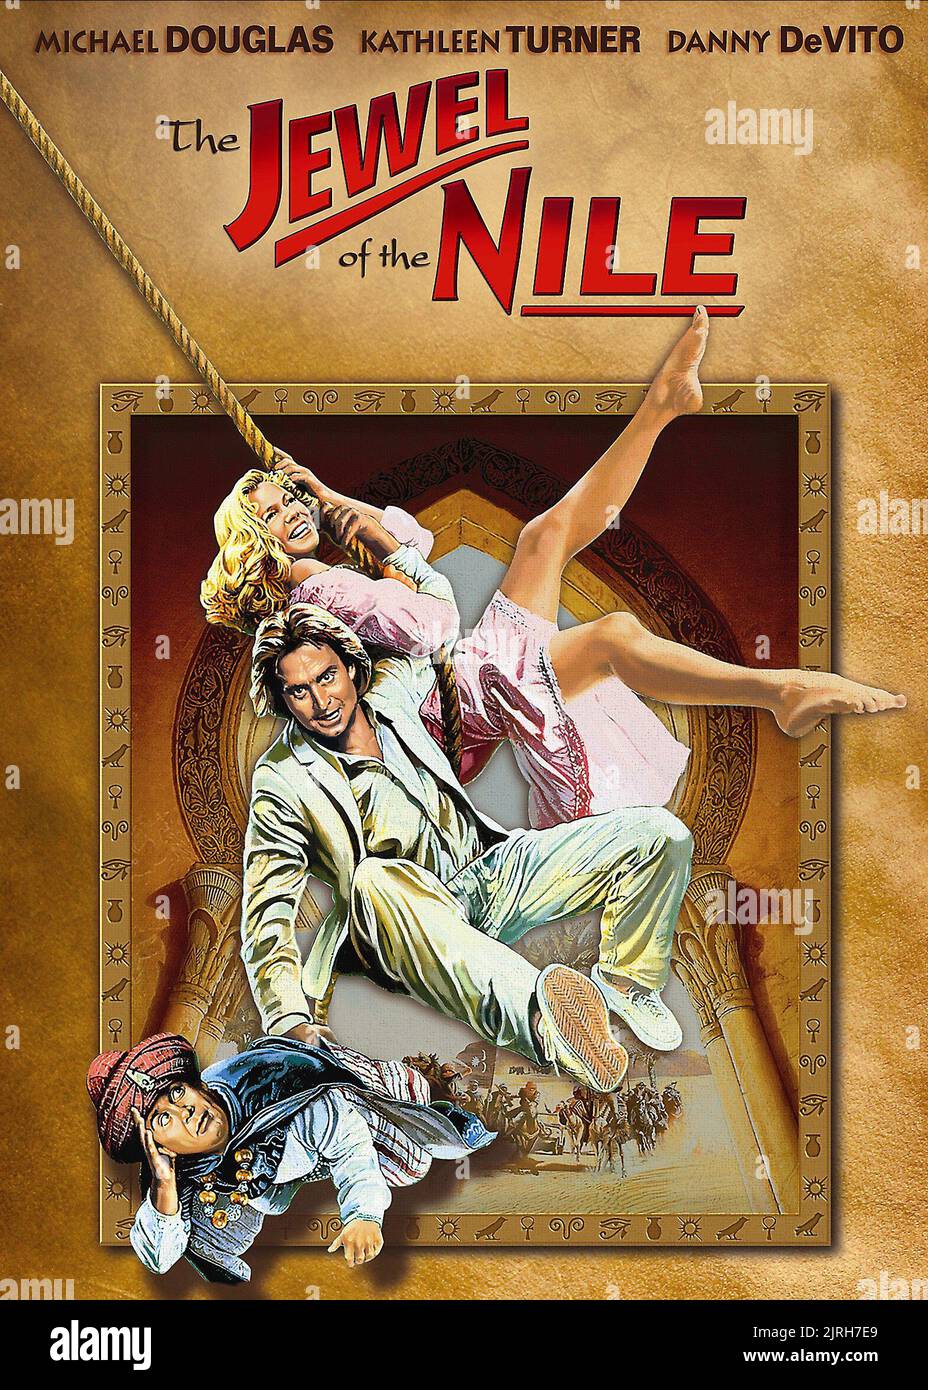 MOVIE POSTER, THE JEWEL OF THE NILE, 1985 Stock Photo